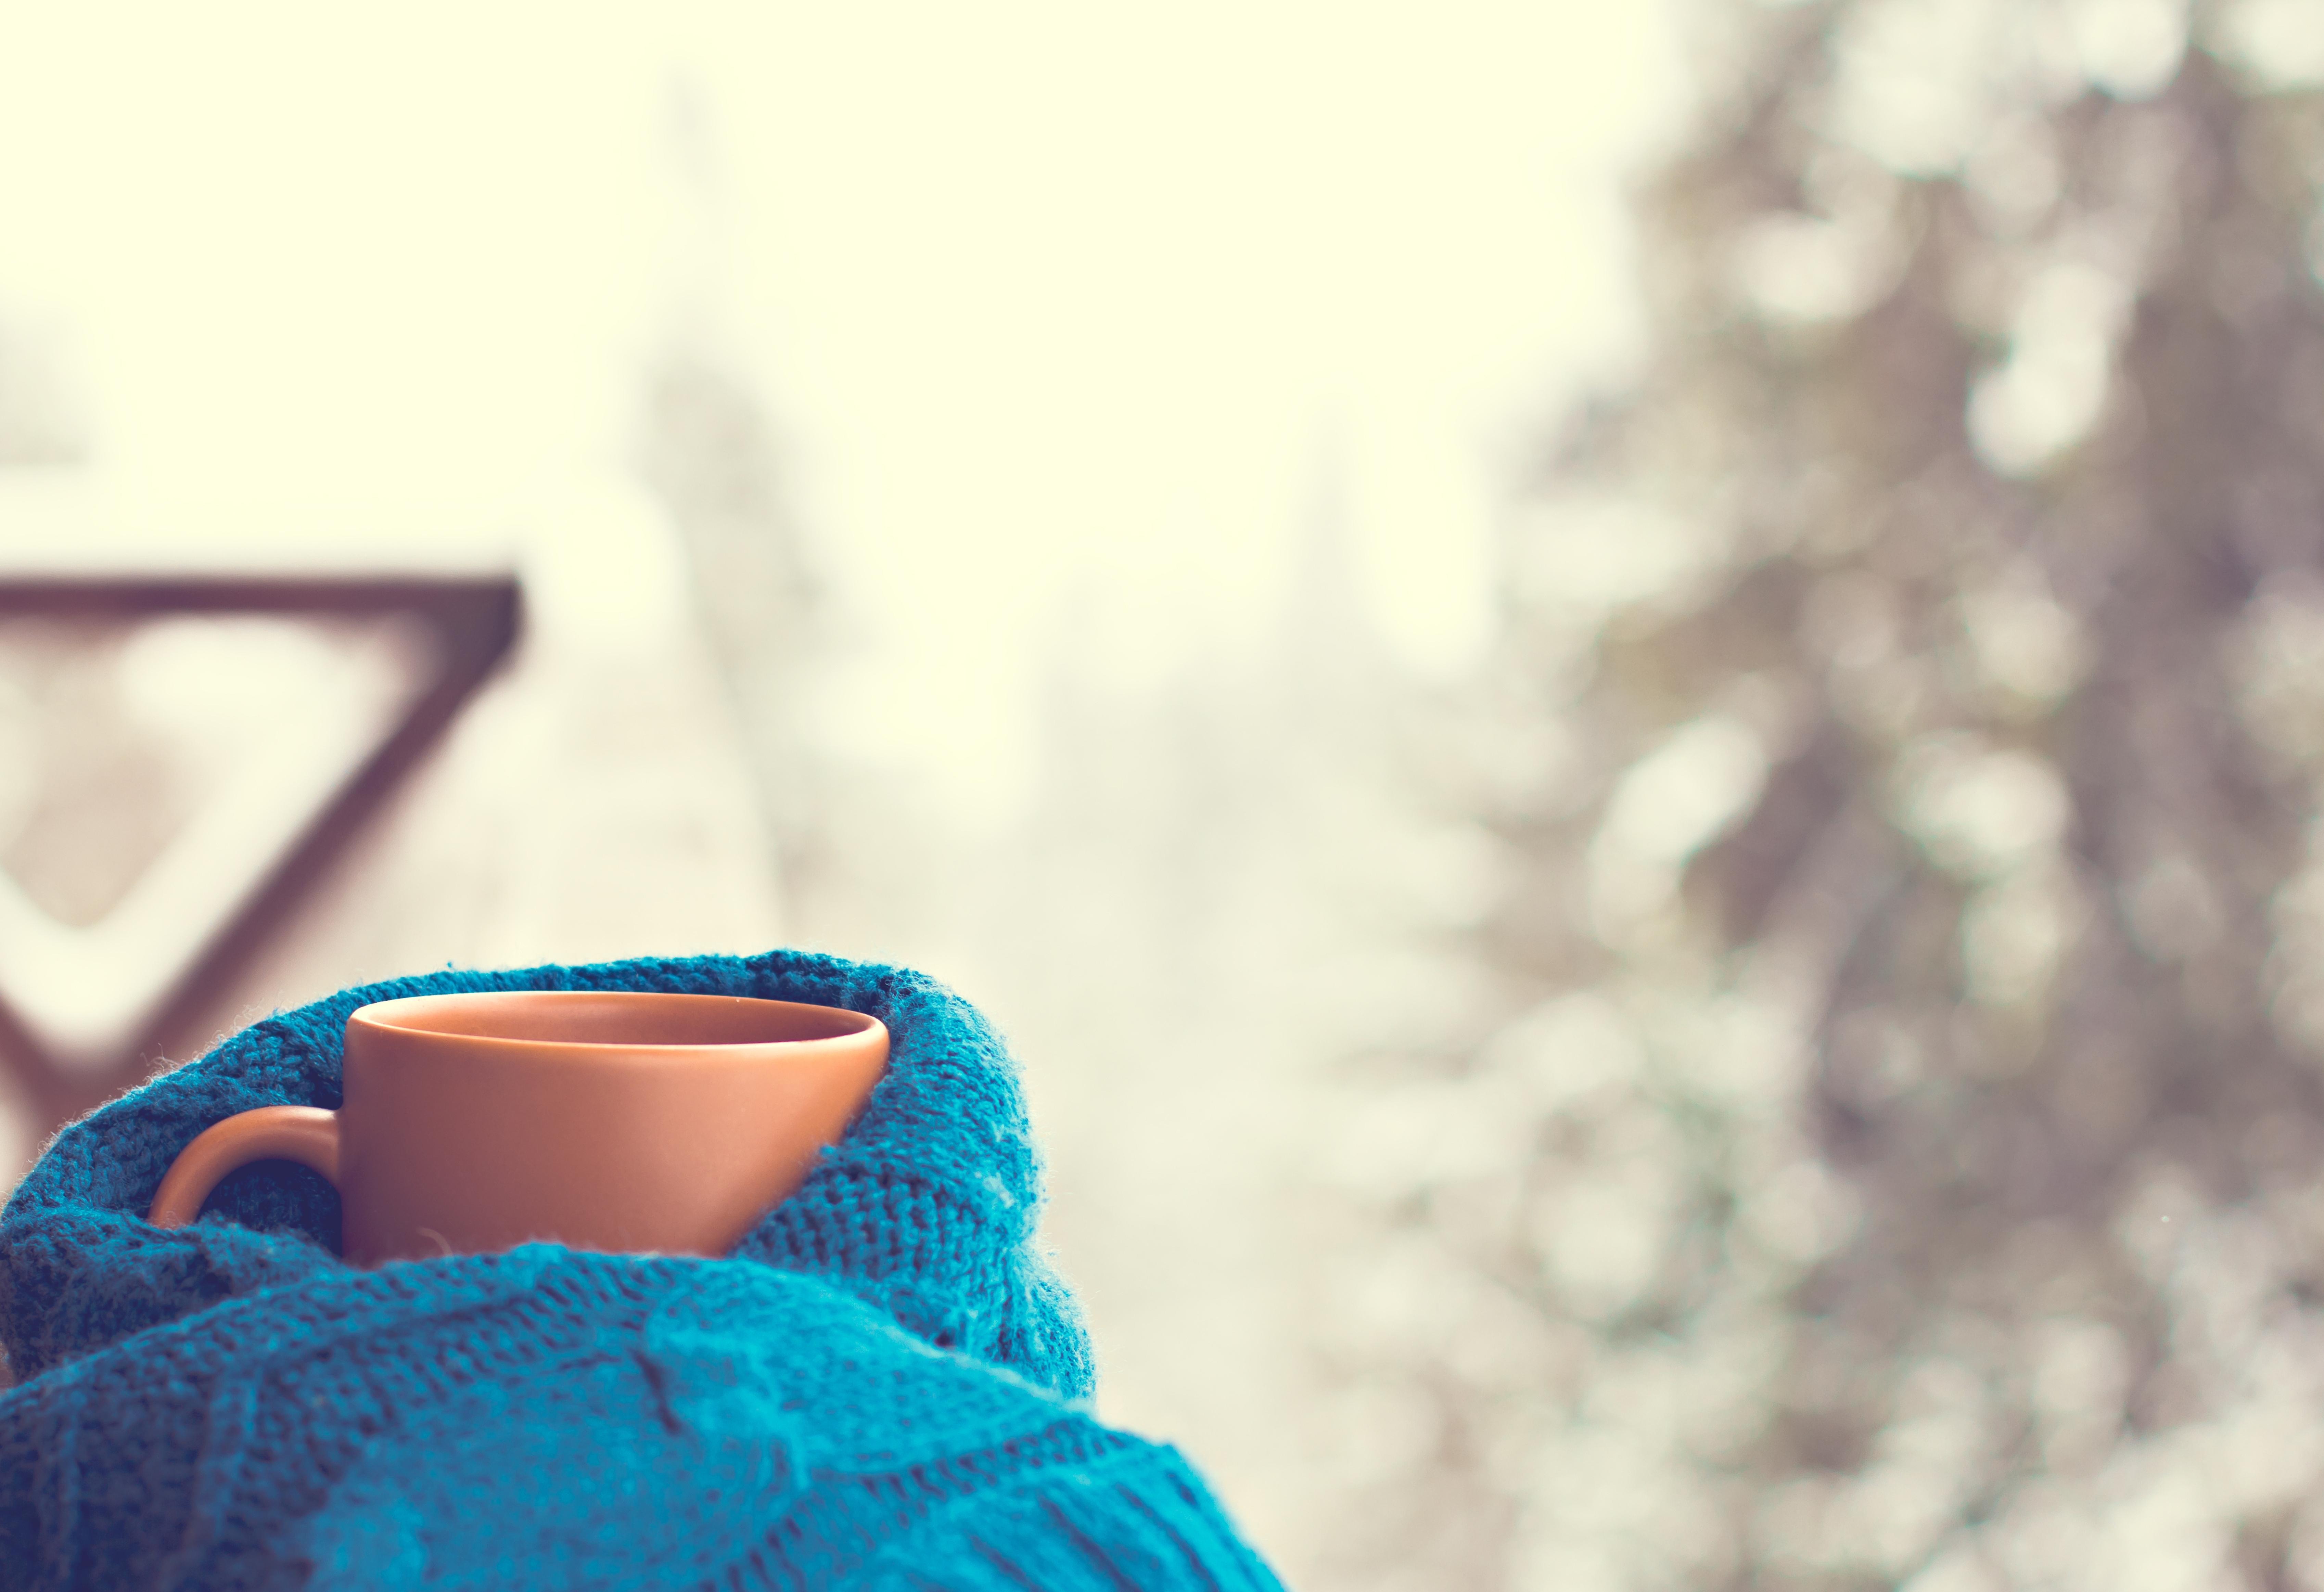 Download wallpaper scarf, Cup, hot, winter, snow, cup